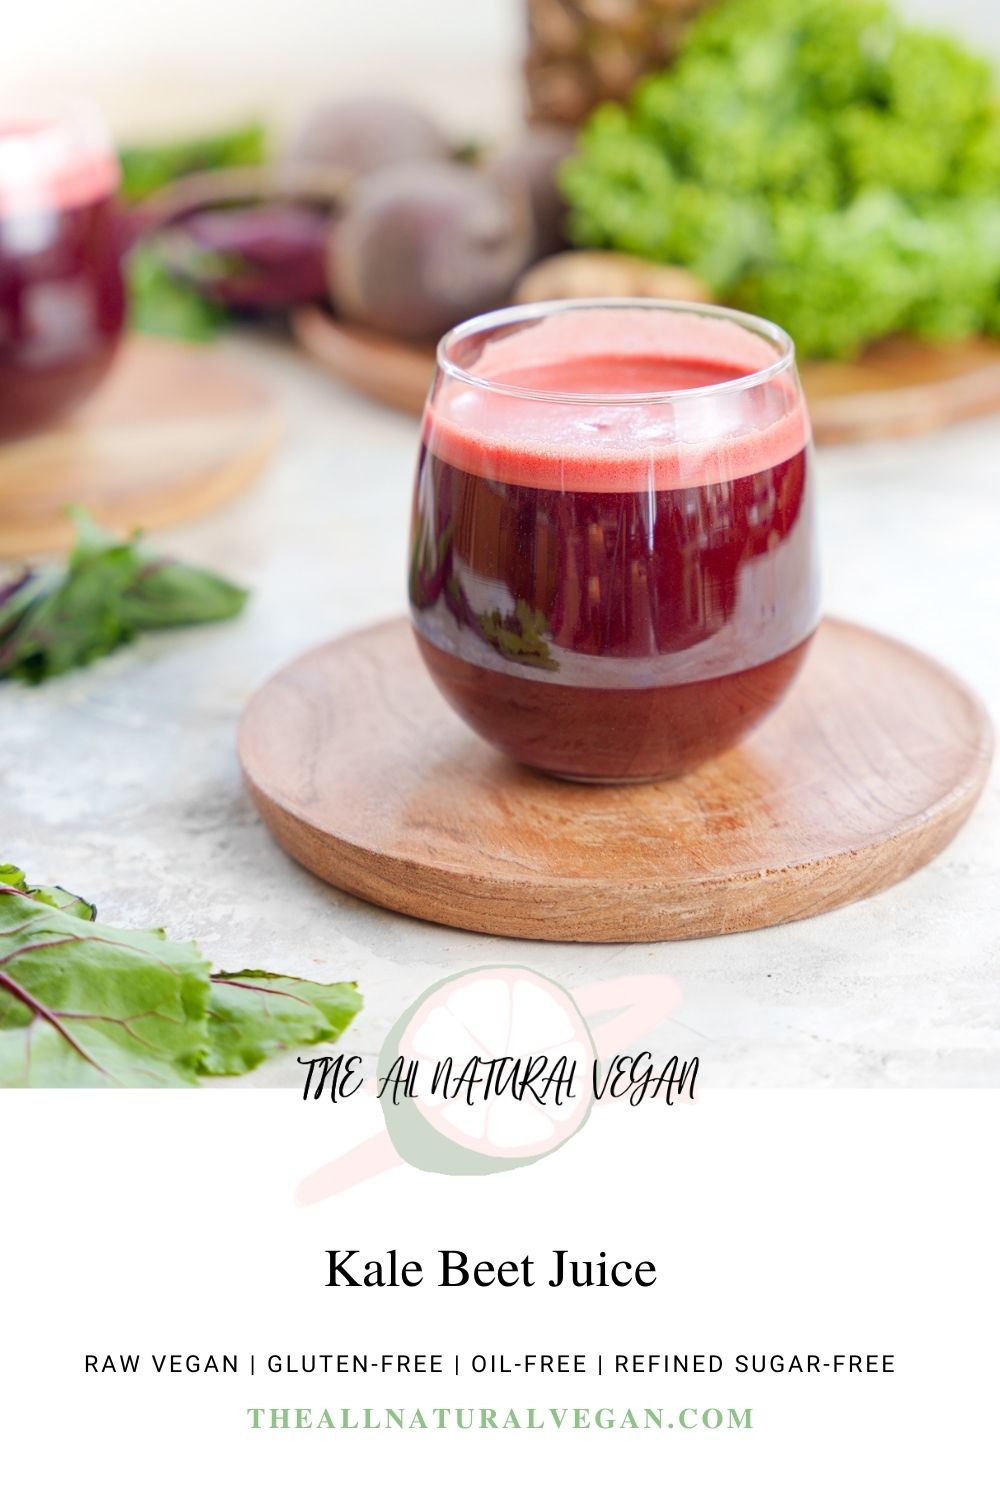 beets and kale juice recipe card stating this recipe is raw vegan, refined sugar-free, gluten-free, and oil-free